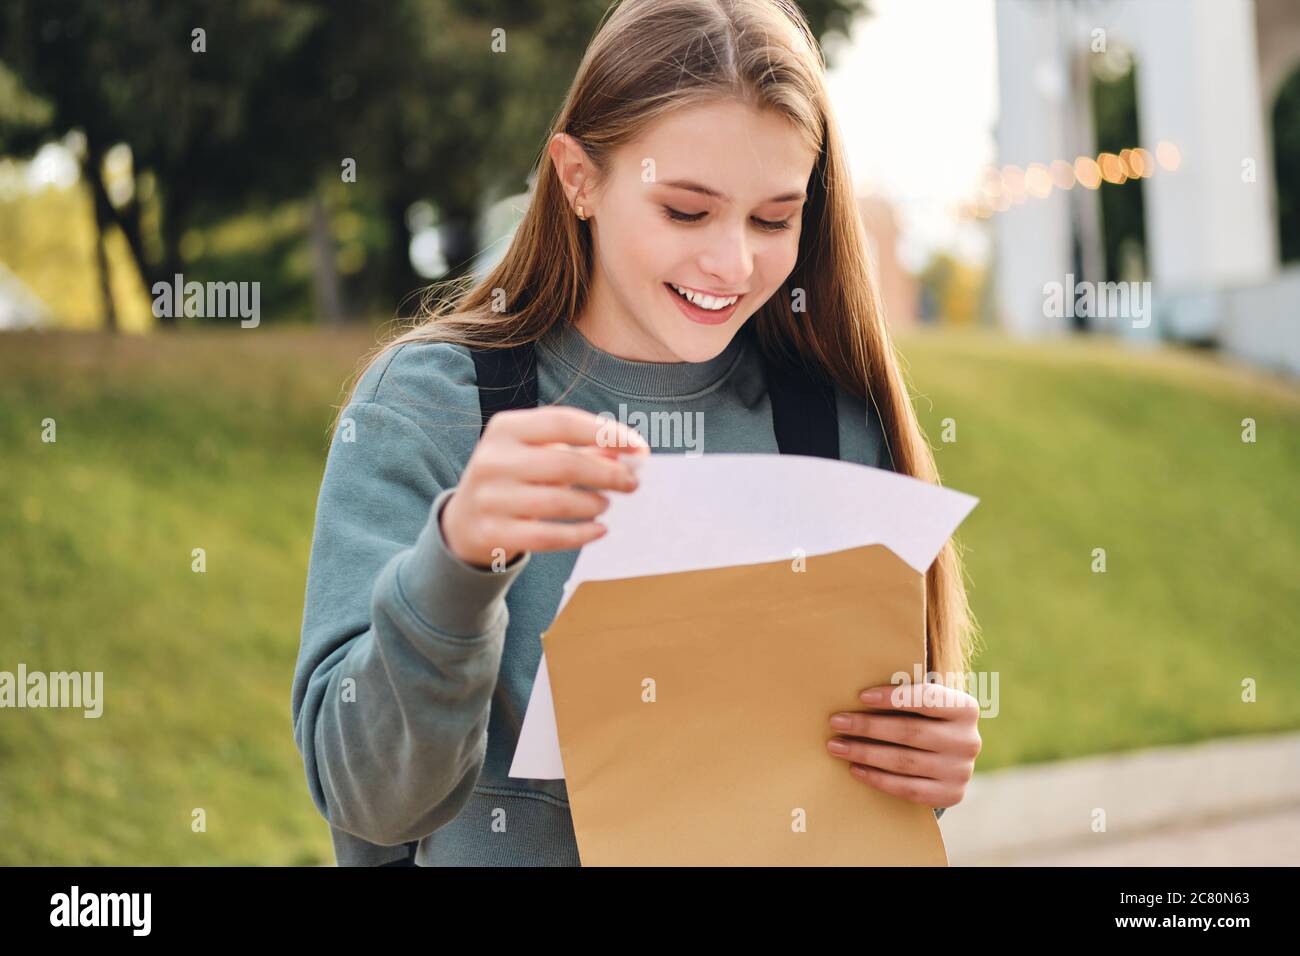 Attractive casual student girl joyfully opening envelope with exams results in park Stock Photo